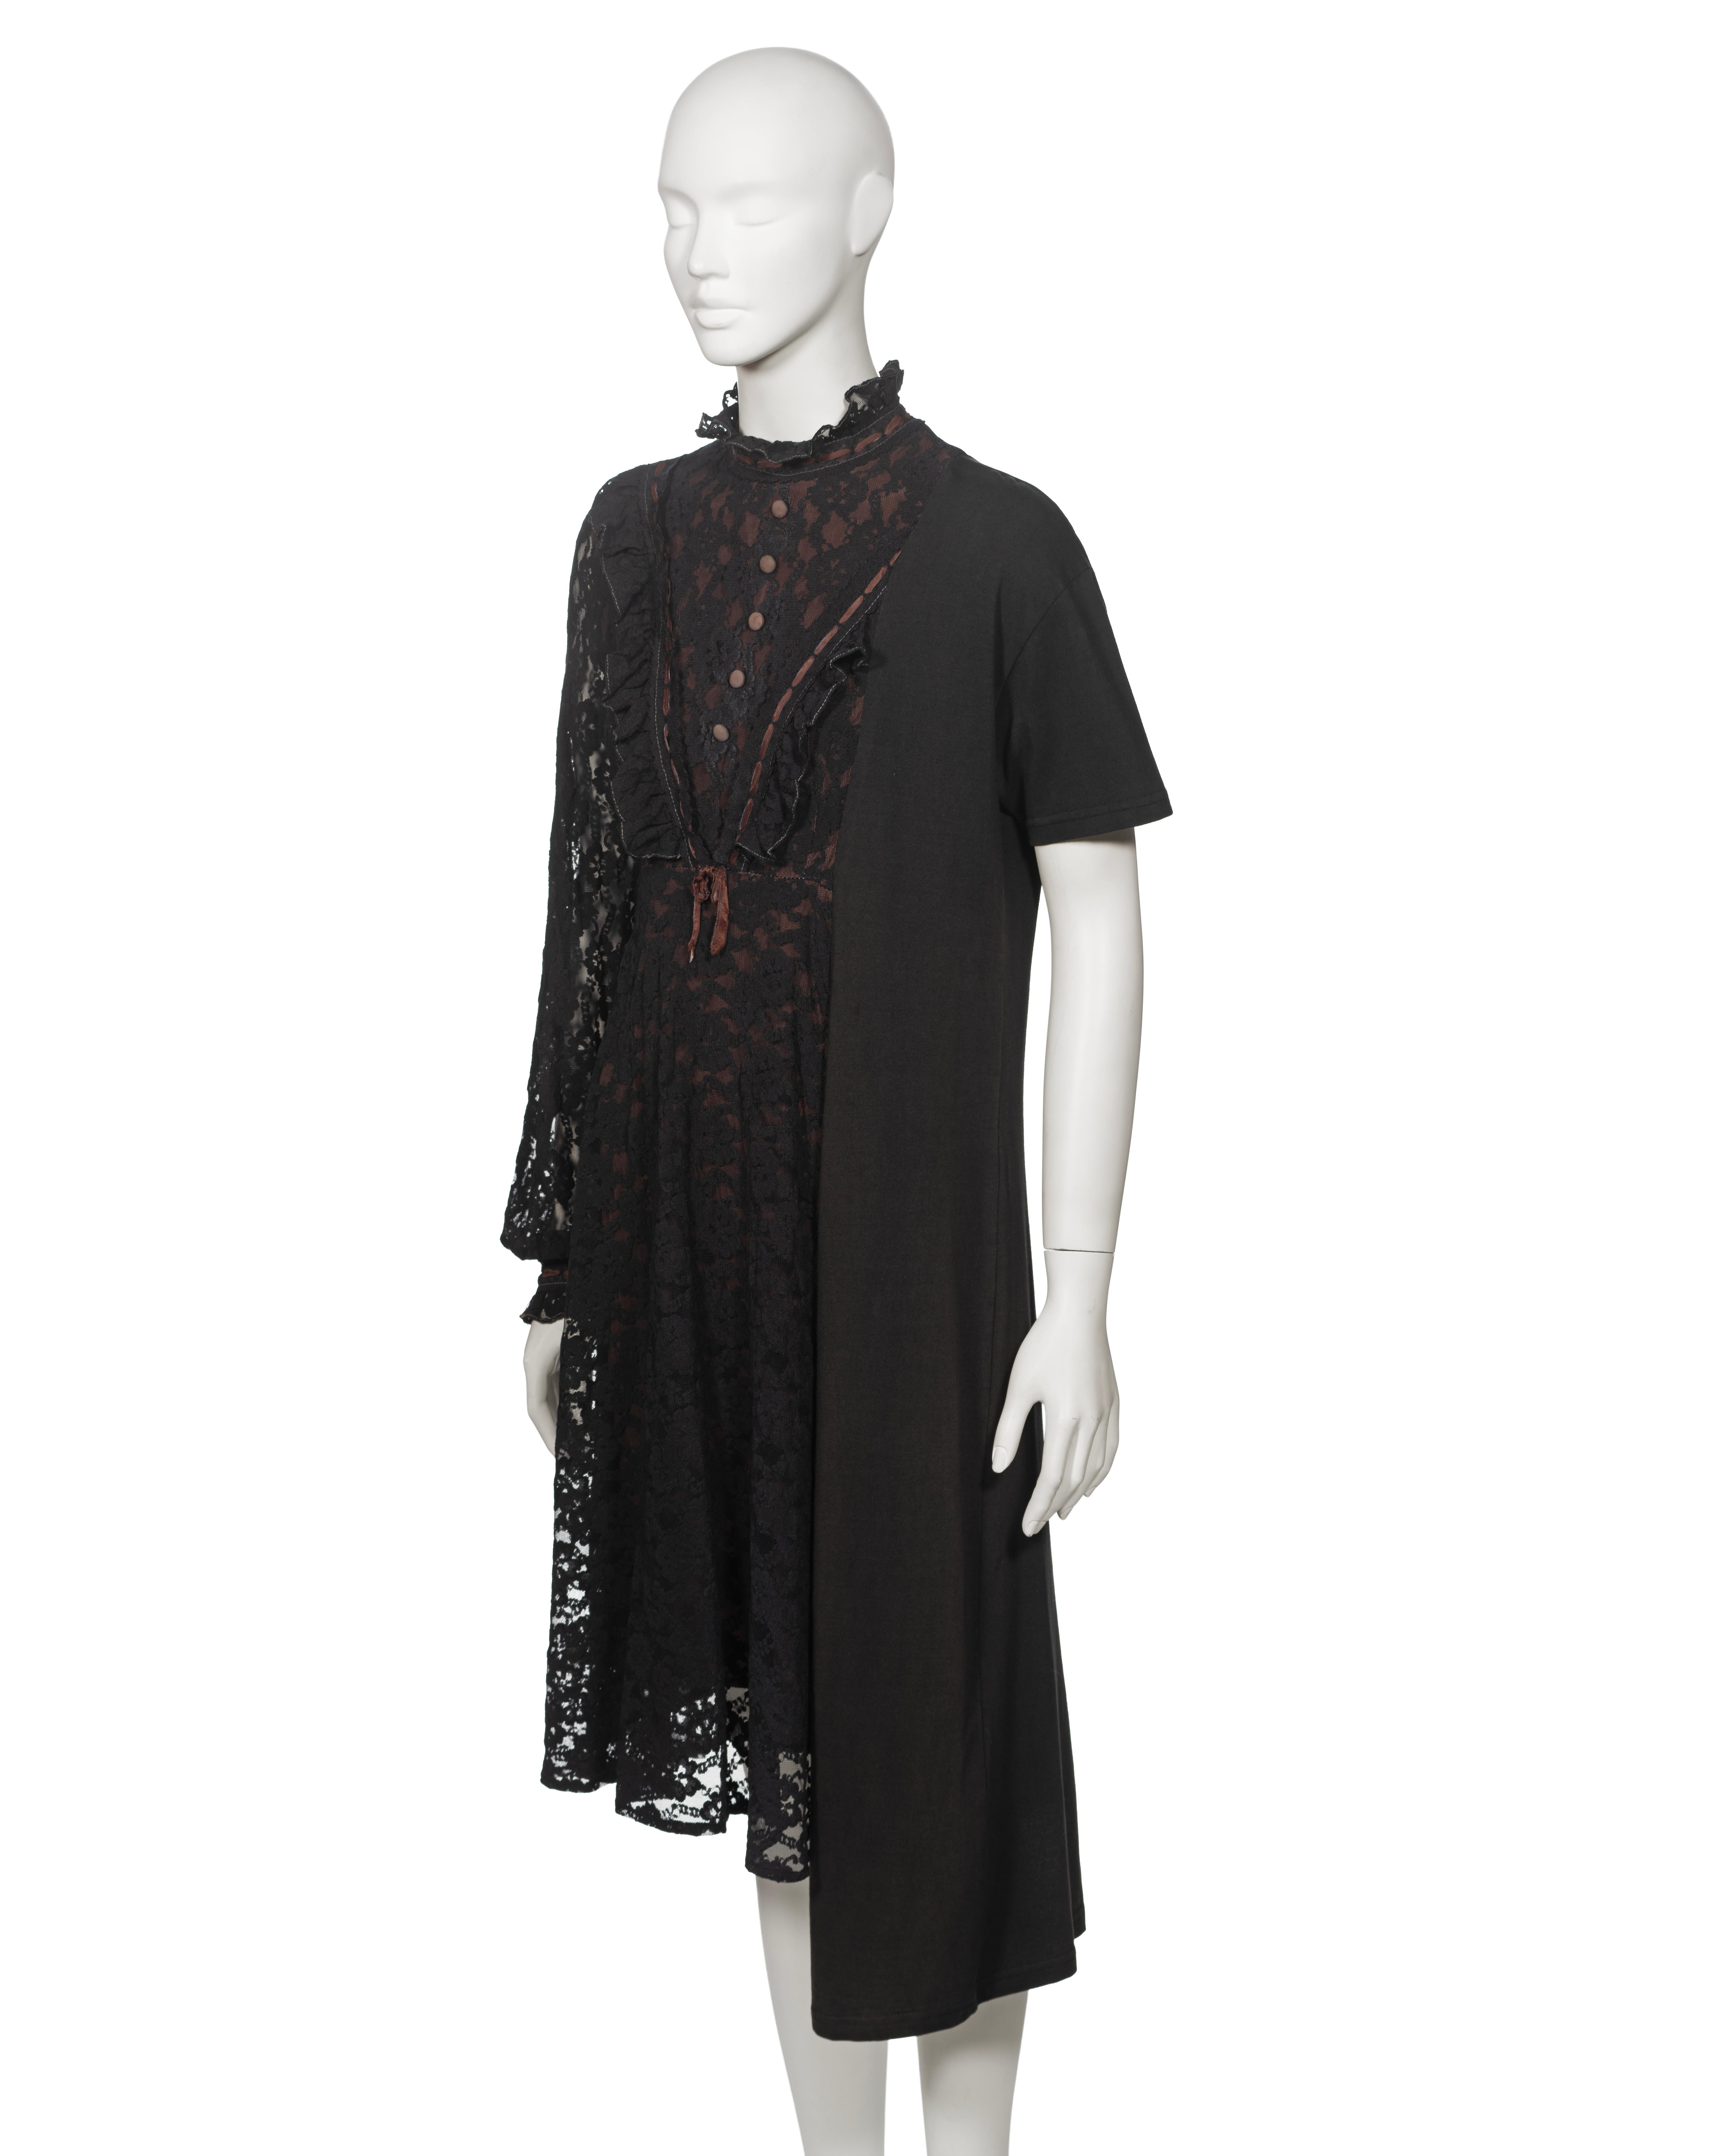 Martin Margiela Artisanal Dress Made From Two Vintage Dresses, fw 2003 For Sale 6